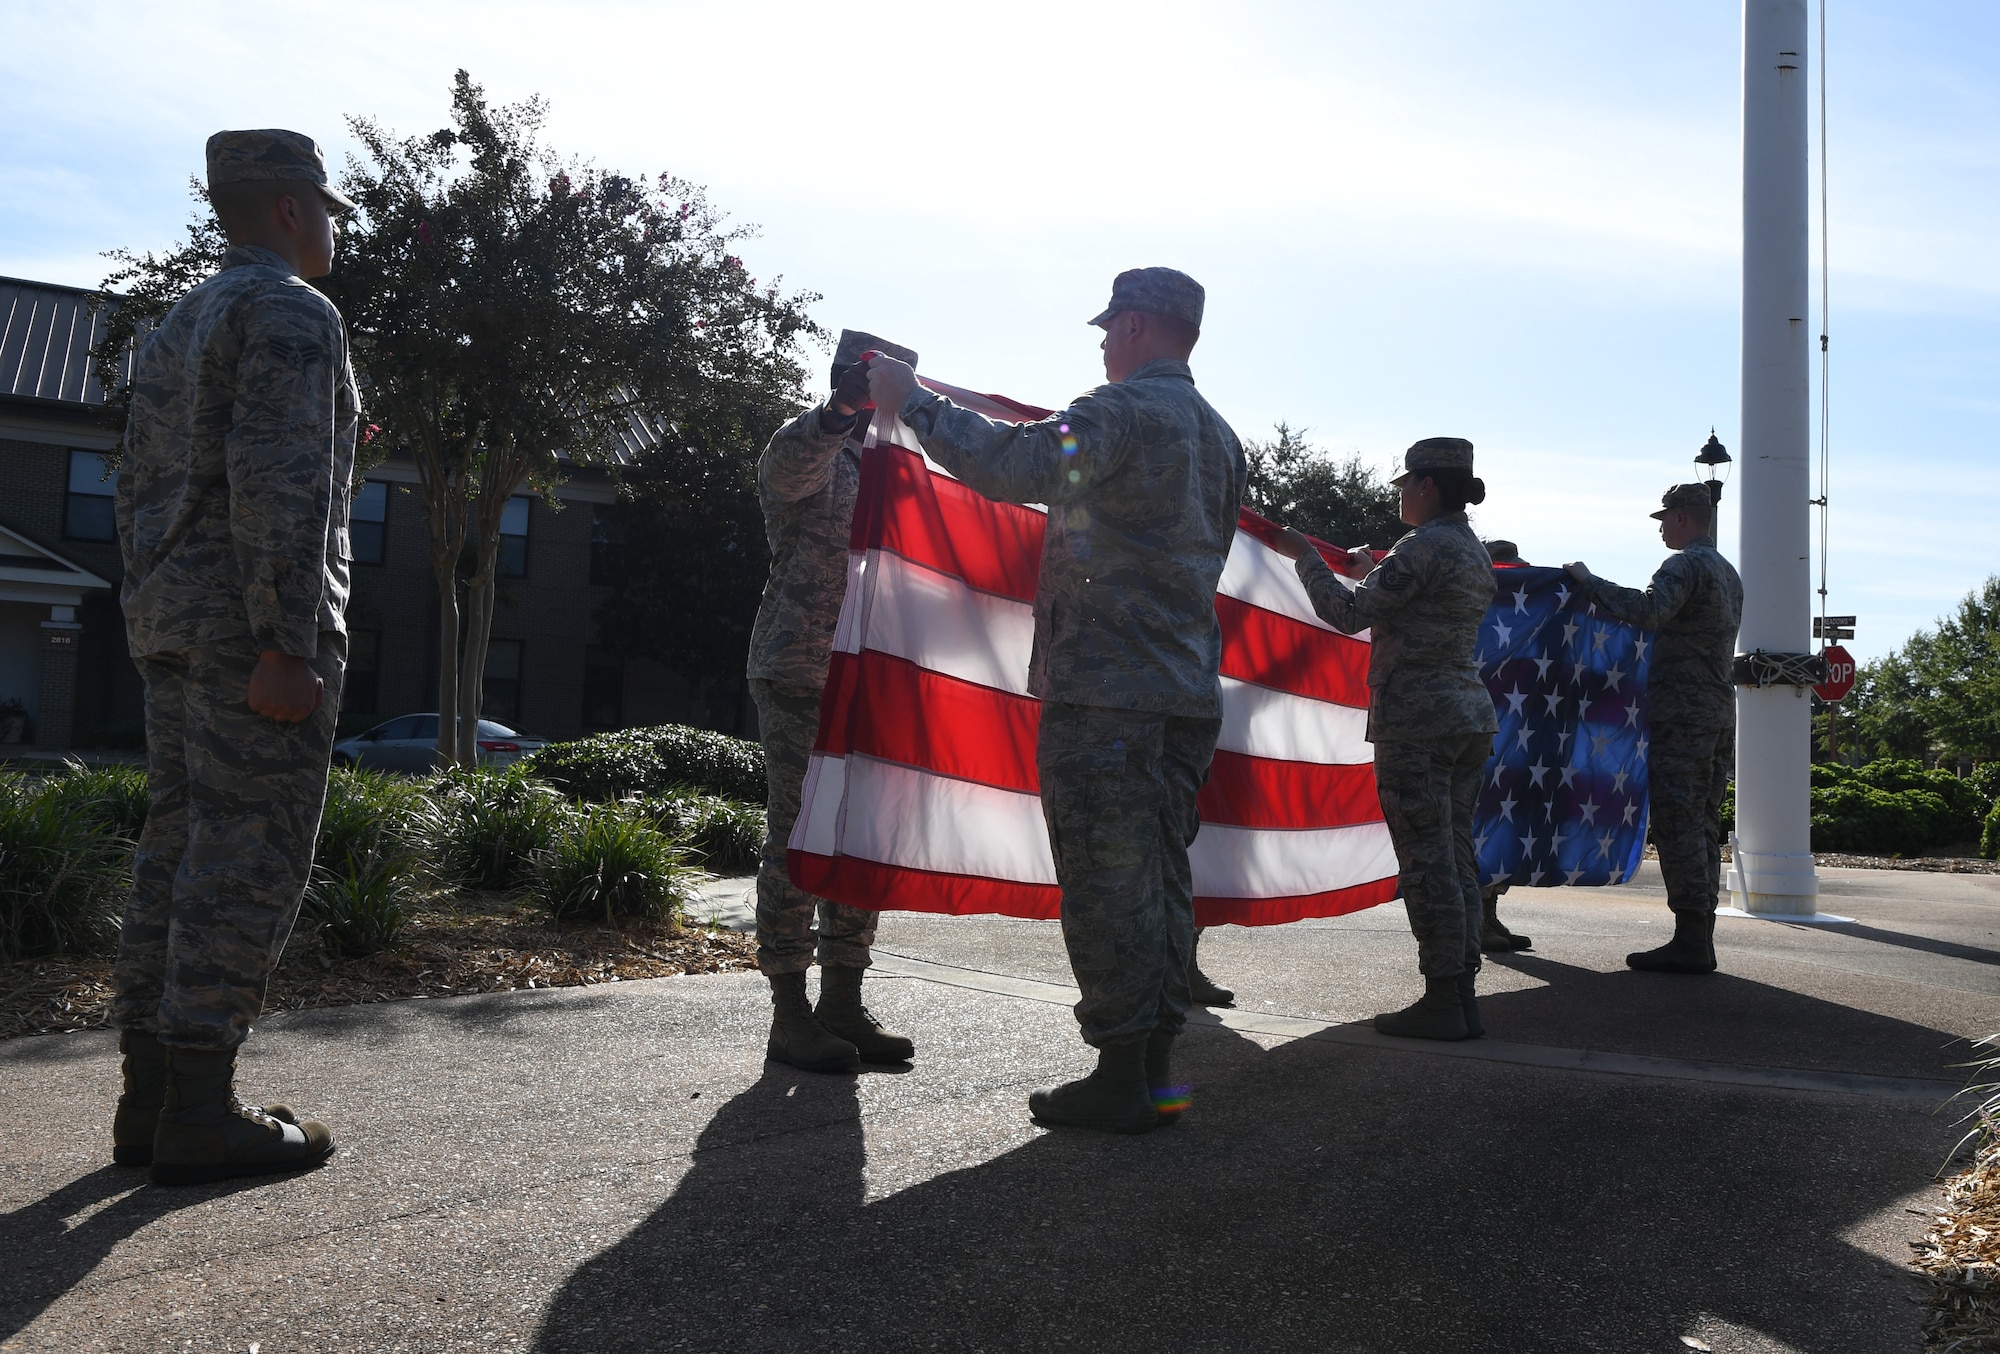 Keesler Airmen participate in folding the U.S. Flag during the POW/MIA retreat ceremony at Keesler Air Force Base, Mississippi, Sept. 20, 2019. The event was held to raise awareness and to pay tribute to all prisoners of war and those military members still missing in action. (U.S. Air Force photo by Kemberly Groue)